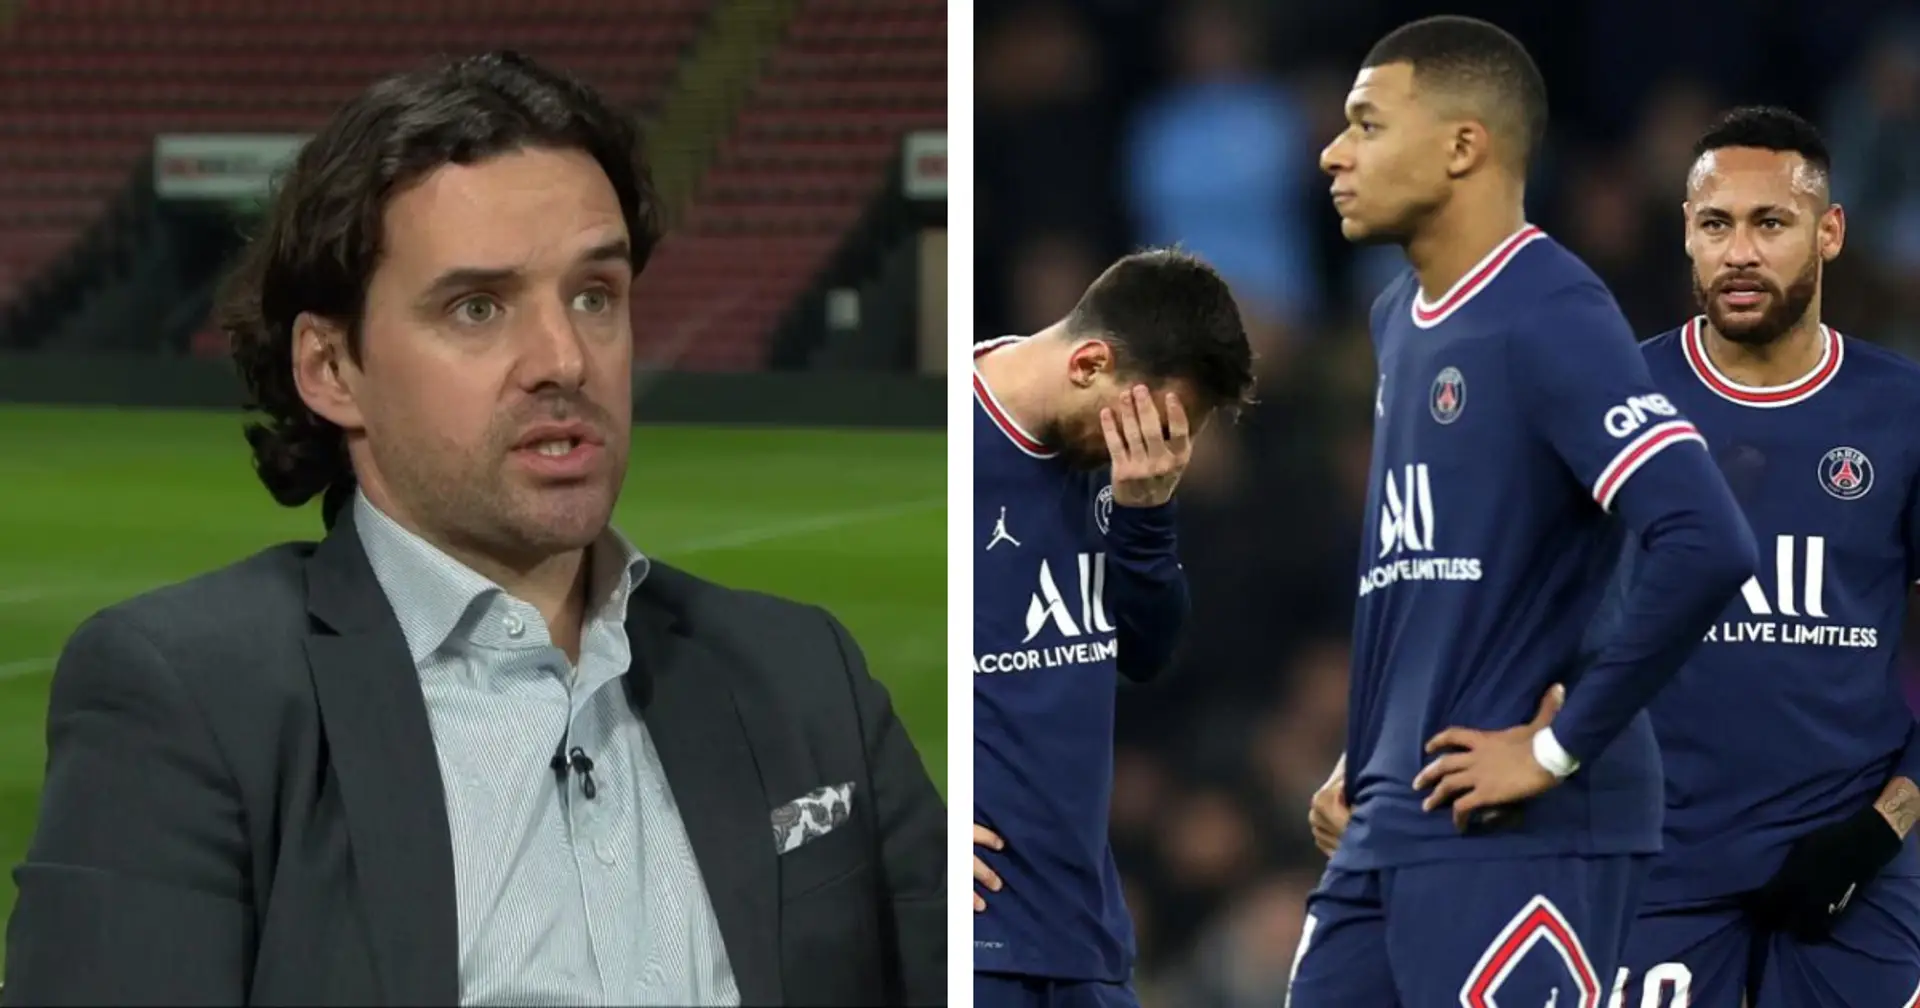 'Messi and Neymar wish they were representing a team like that': Hargreaves on Man City's win vs PSG